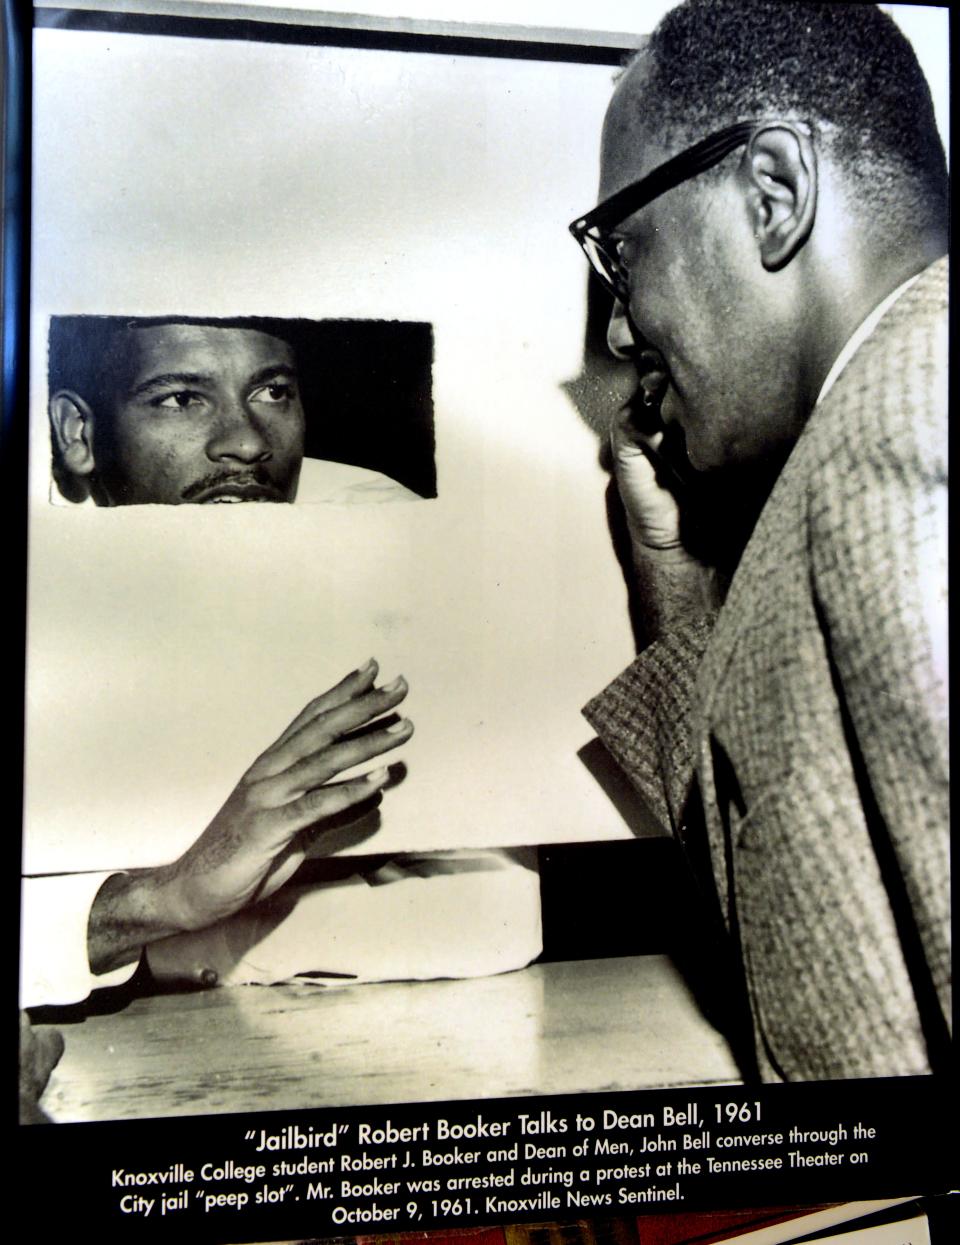 Robert Booker, then a student at Knoxville College, talks to Knoxville College Dean John Bell from a city jail cell after Booker's arrest during a protest at the Tennessee Theatre on Oct. 9, 1961.